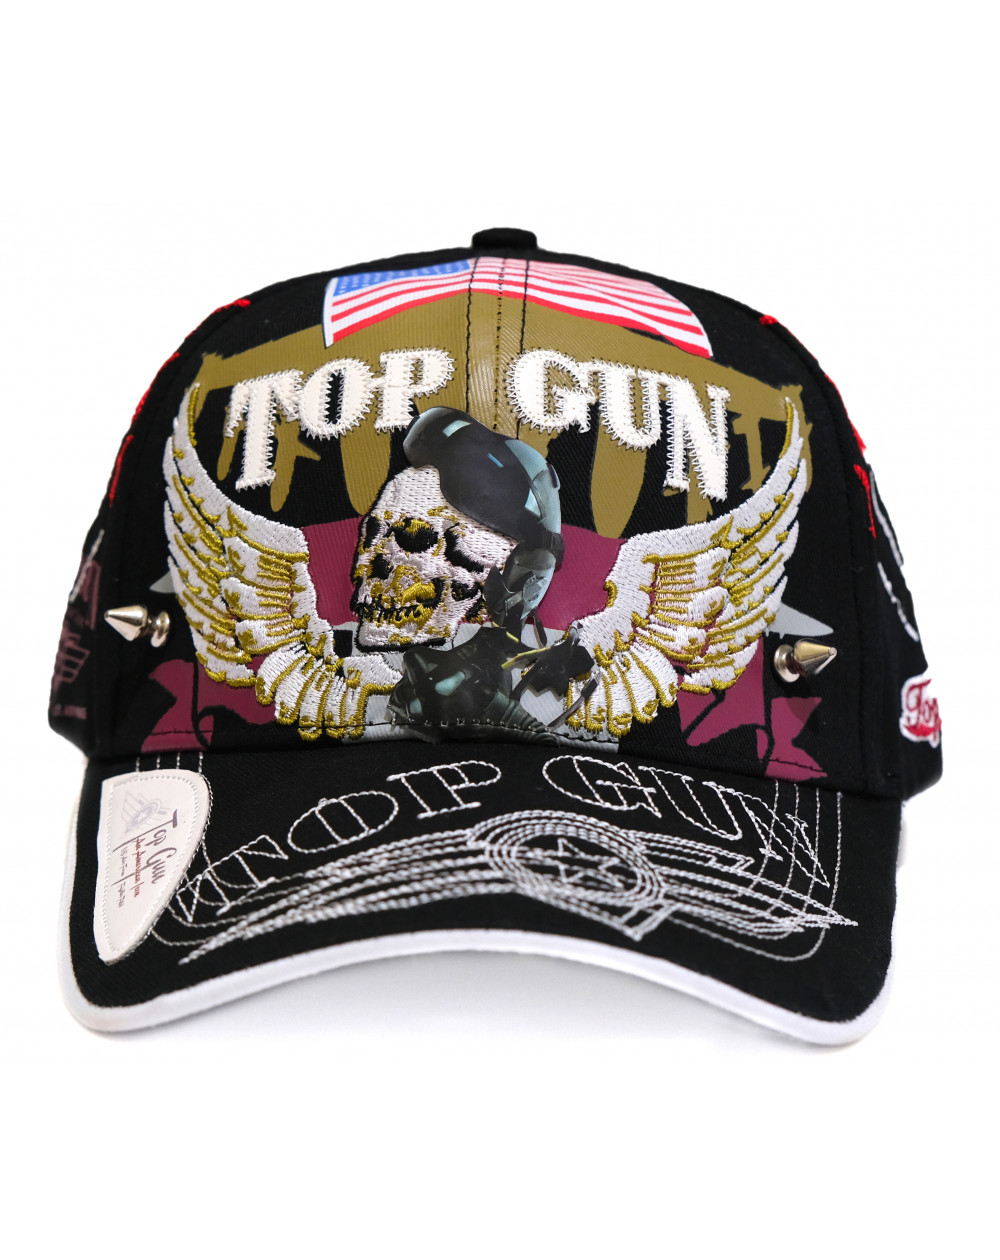 TOP GUN® EXCLUSIVE - Black Numbered Edition / Limited 